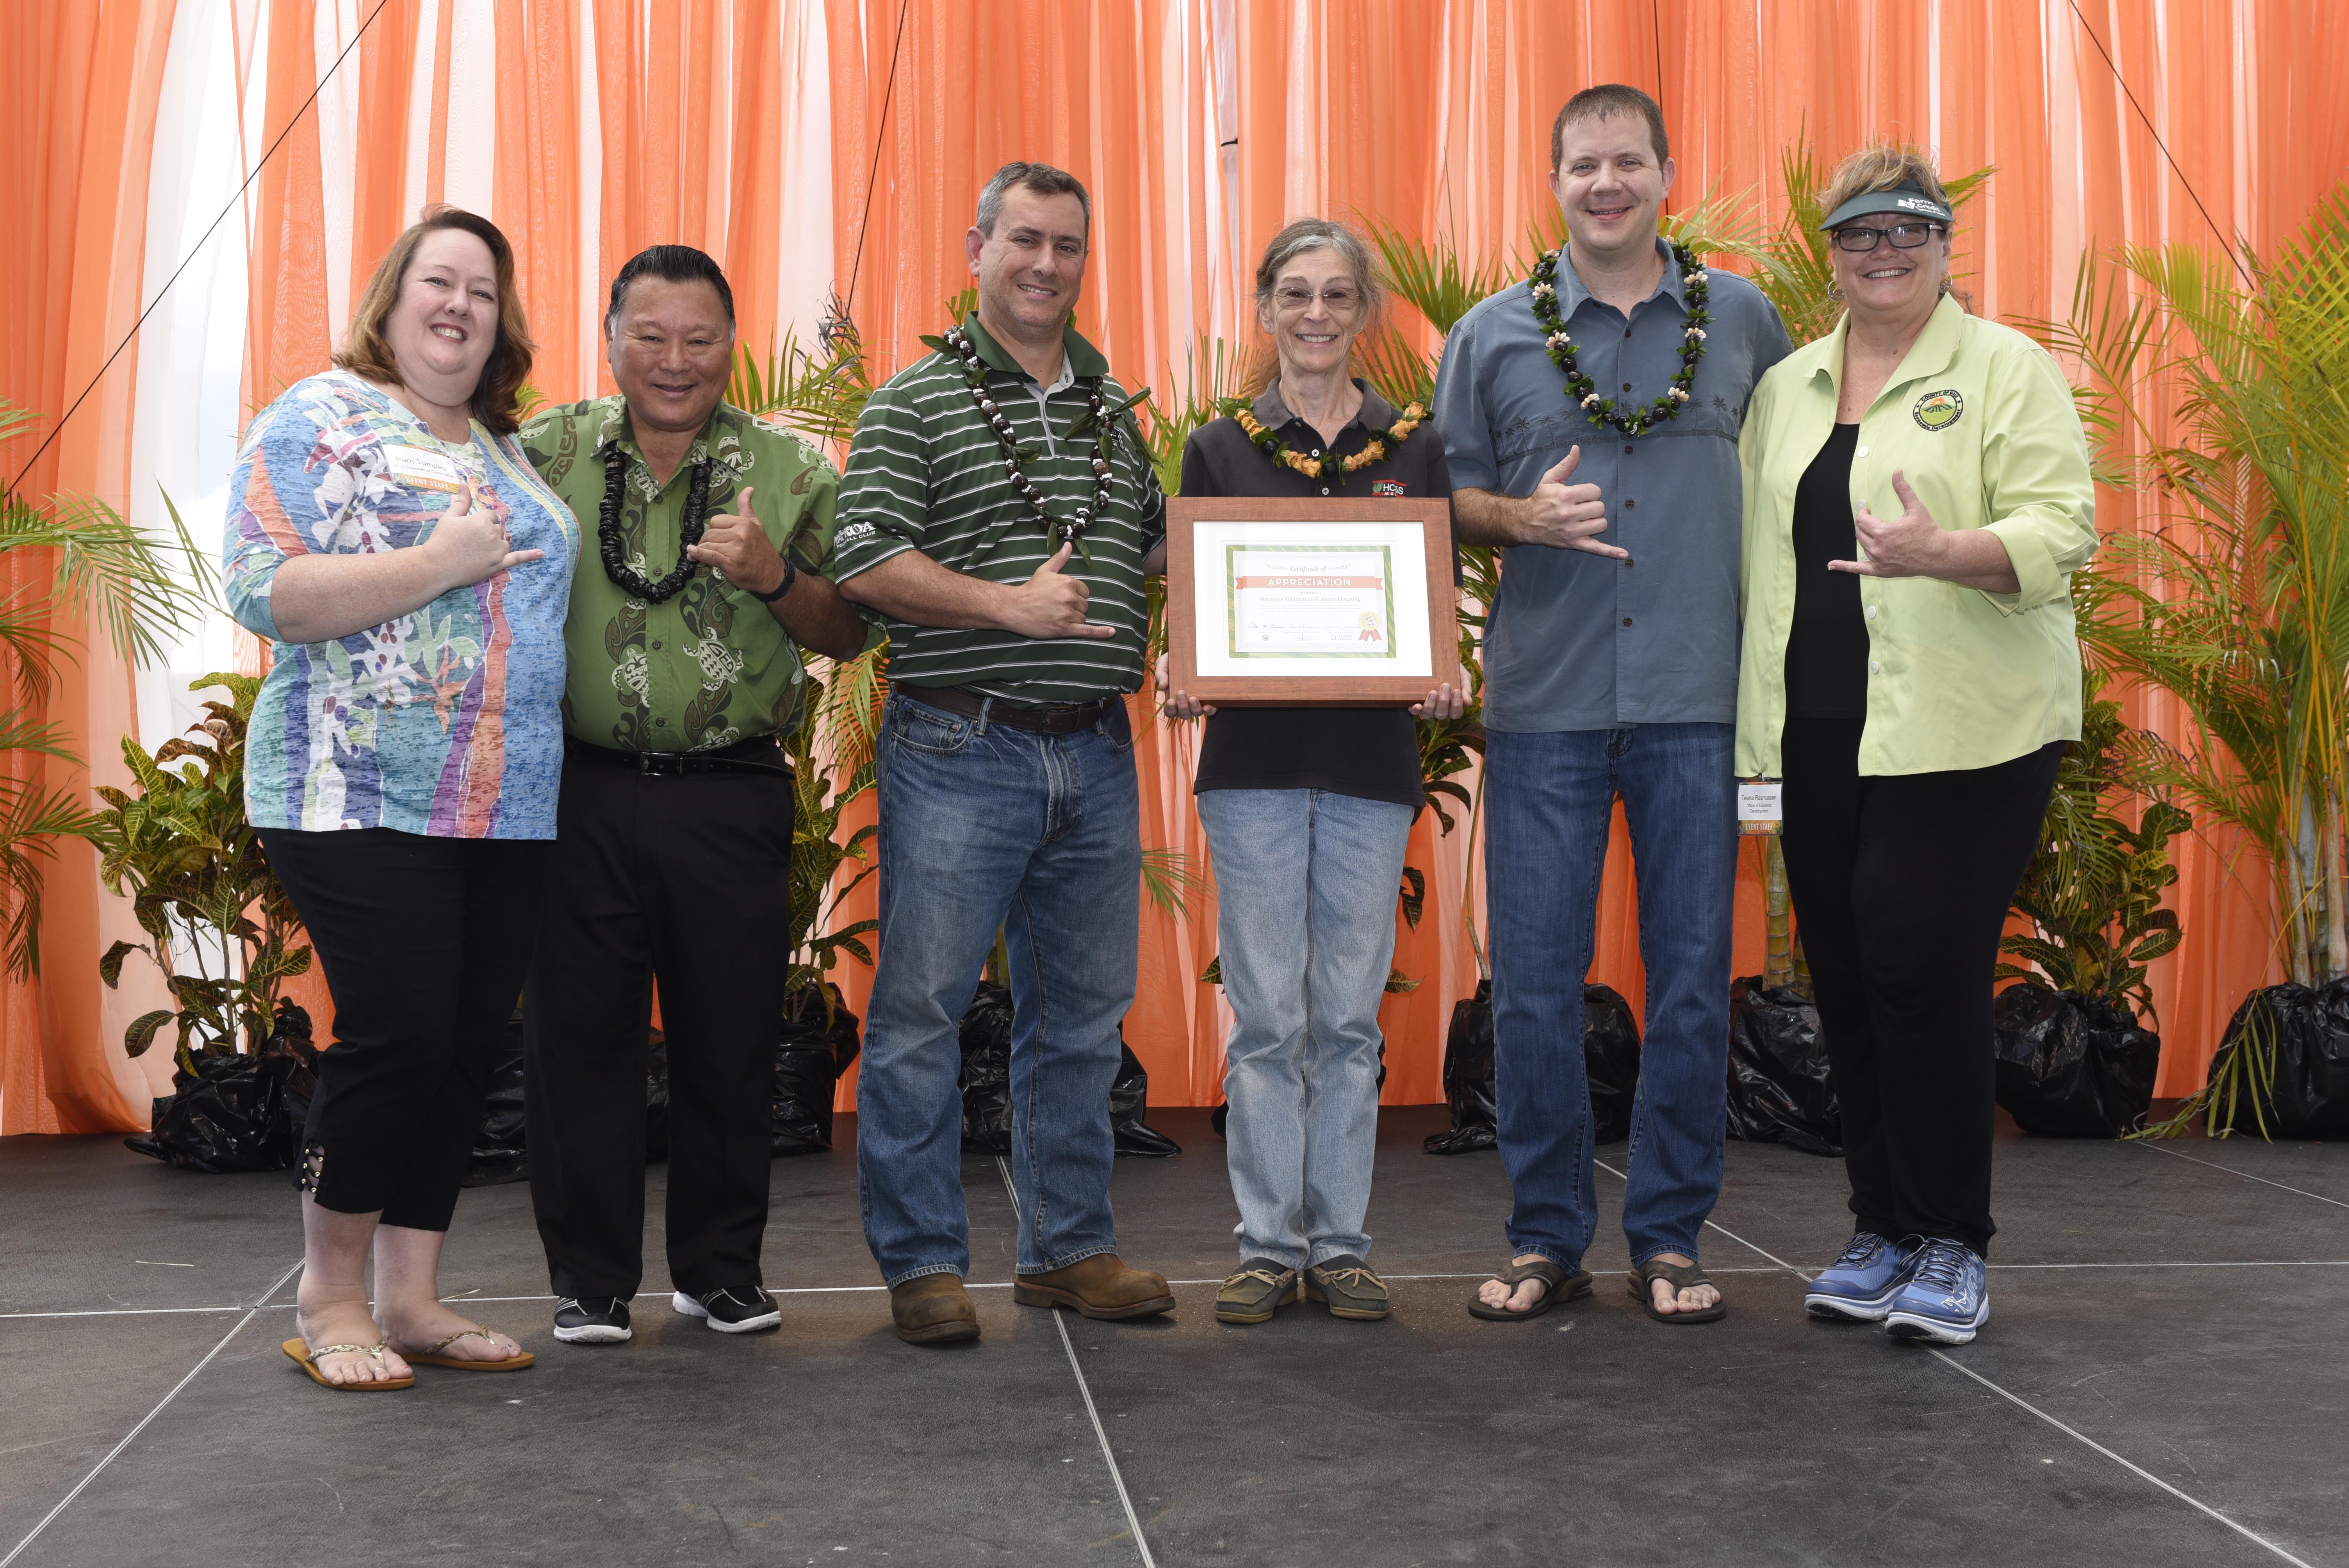 A special tribute to HC&S was presented on Saturday, in honor of 140 years of supporting small businesses and value-added manufacturers in the County of Maui. Pictured from left: Pam Tumpap (Maui Chamber of Commerce), Mayor Alan Arakawa, Rick Volner (HC&S), Anna Skrobecki (HC&S), Dan Ligienza (HC&S), and Teena Rasmussen (County of Maui Mayor’s Office of Economic Development). Photo by Jose Morales